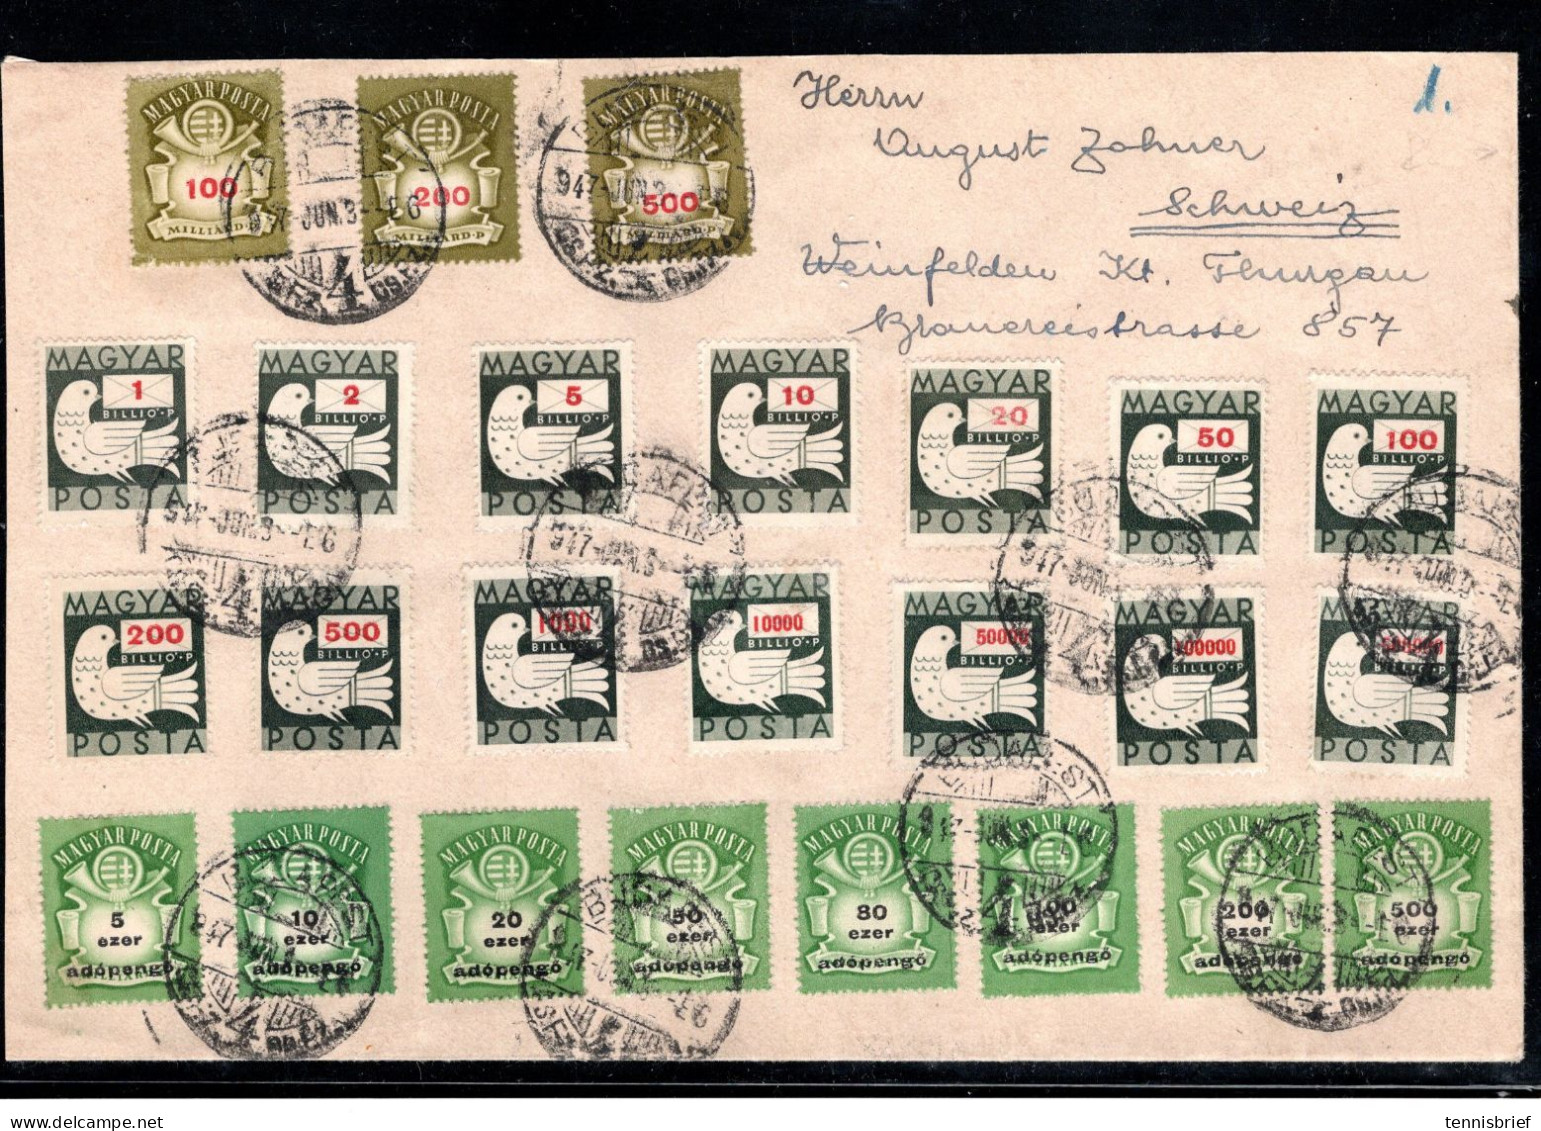 1947 , Inflation Cover , Set Franking , High Values , Cover To Switzerland , Rare On Cover !! # 1495 - Covers & Documents